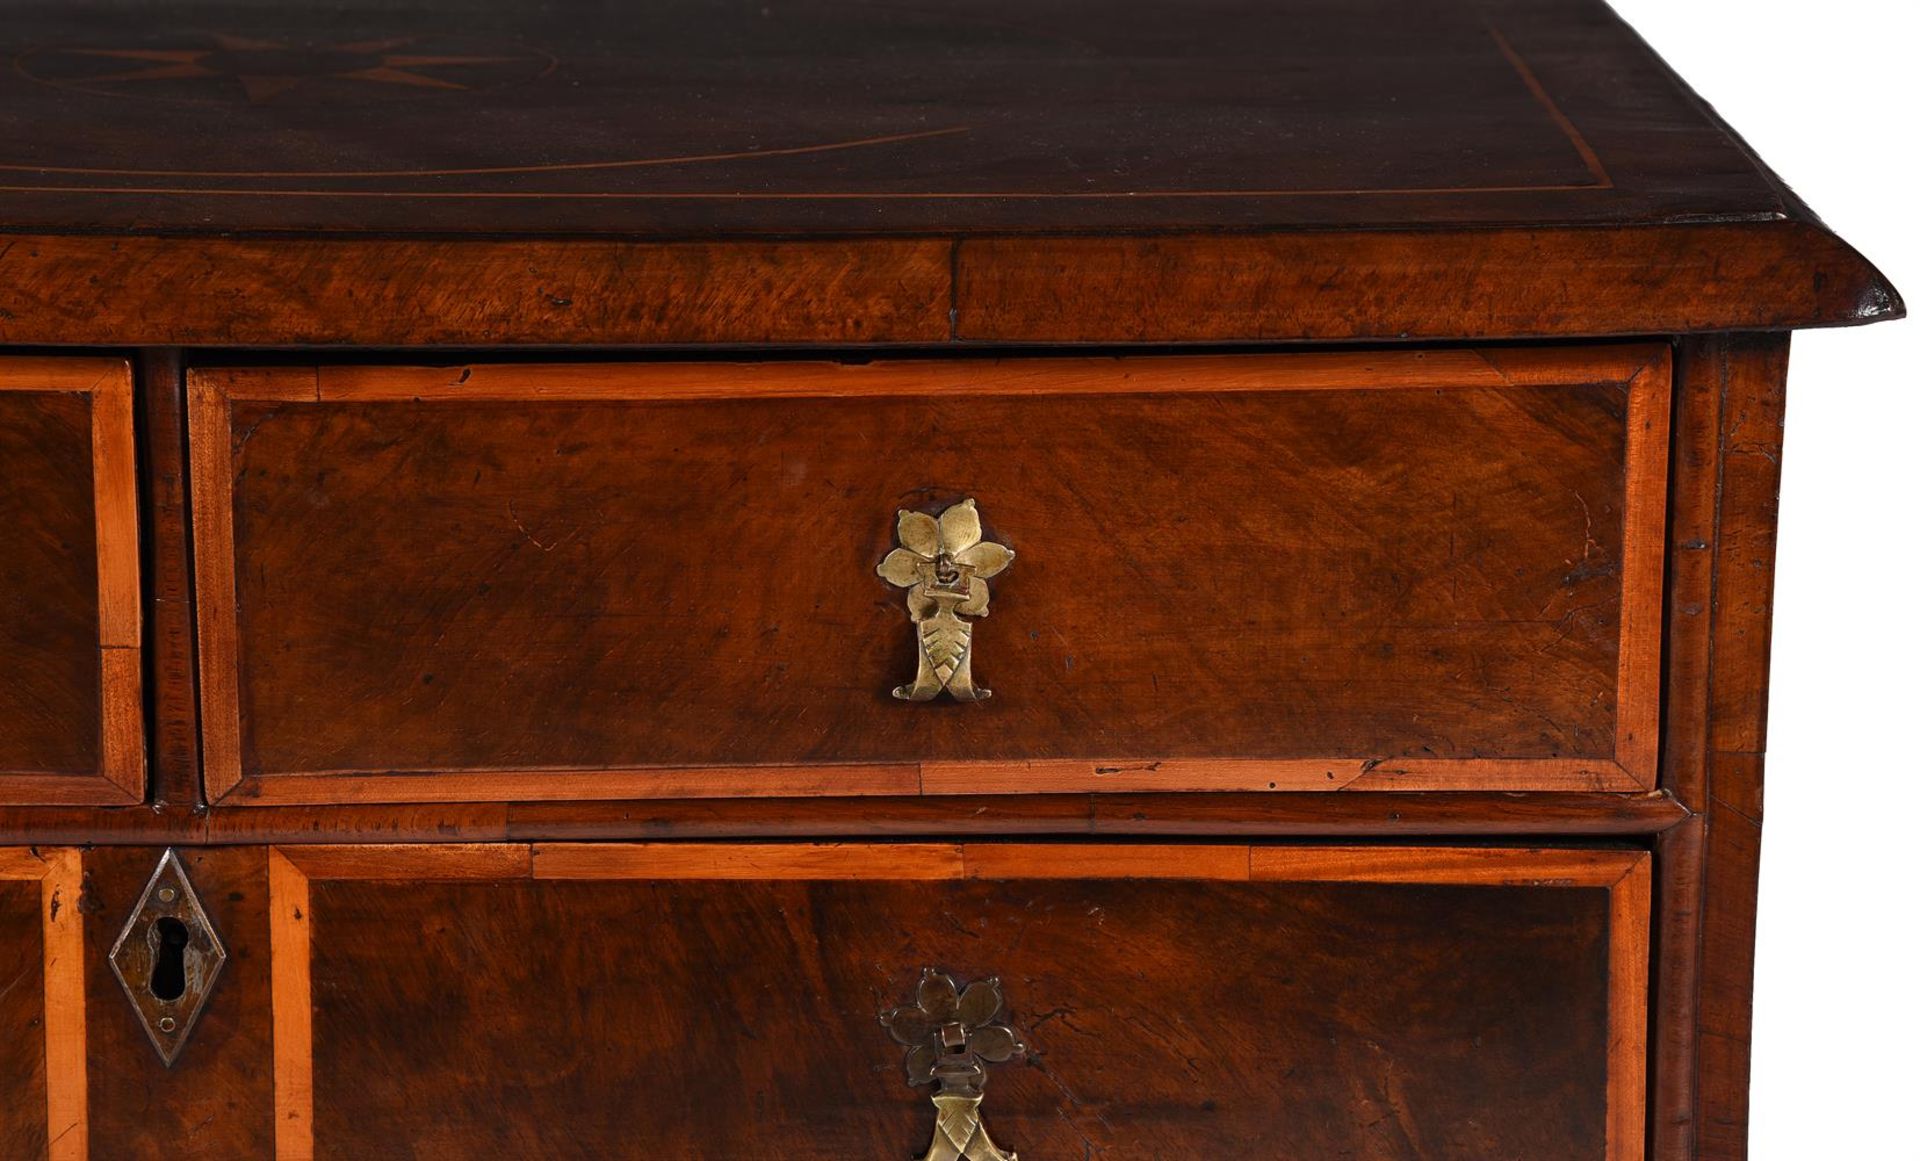 A WILLIAM III WALNUT AND HOLLY BANDED CHEST OF DRAWERS, CIRCA 1700 - Image 2 of 5